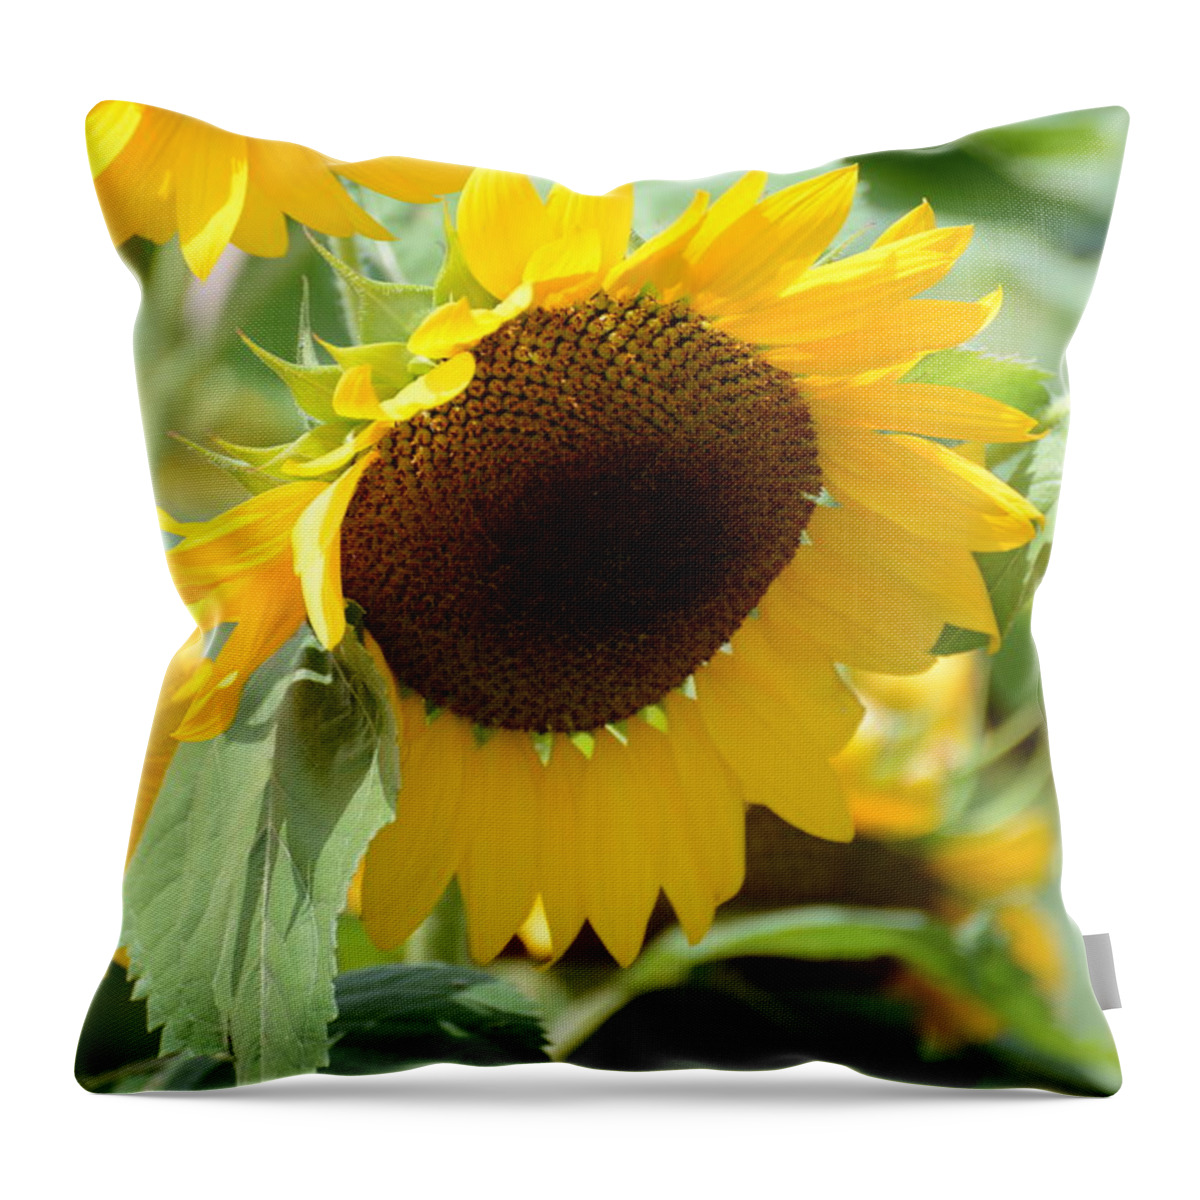 Beautiful Throw Pillow featuring the photograph Hello Beautiful by Linda Mishler